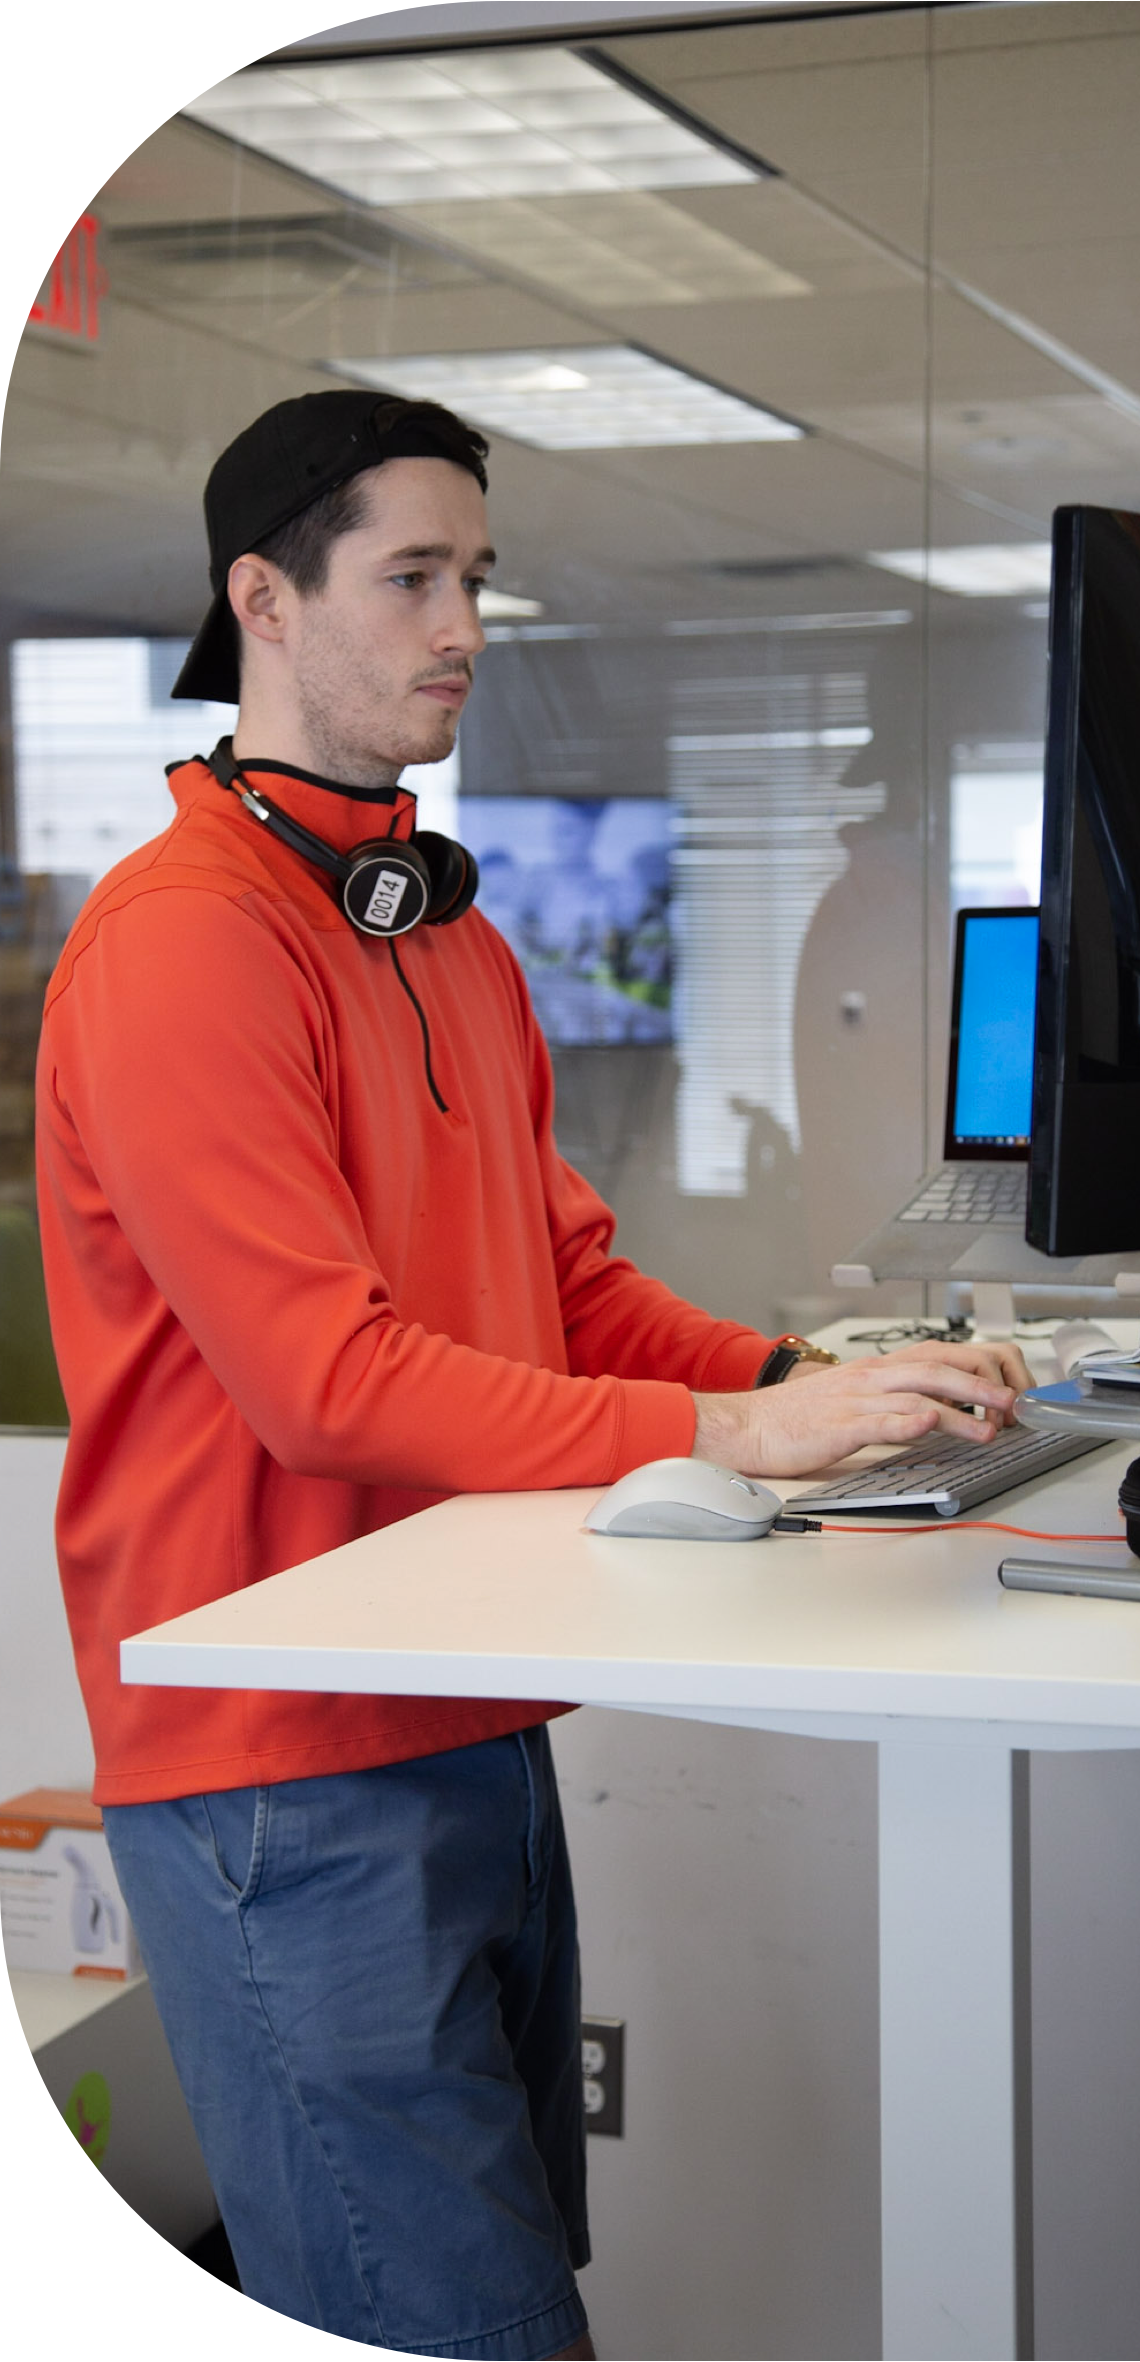 Image of Remine employee working at standup desk